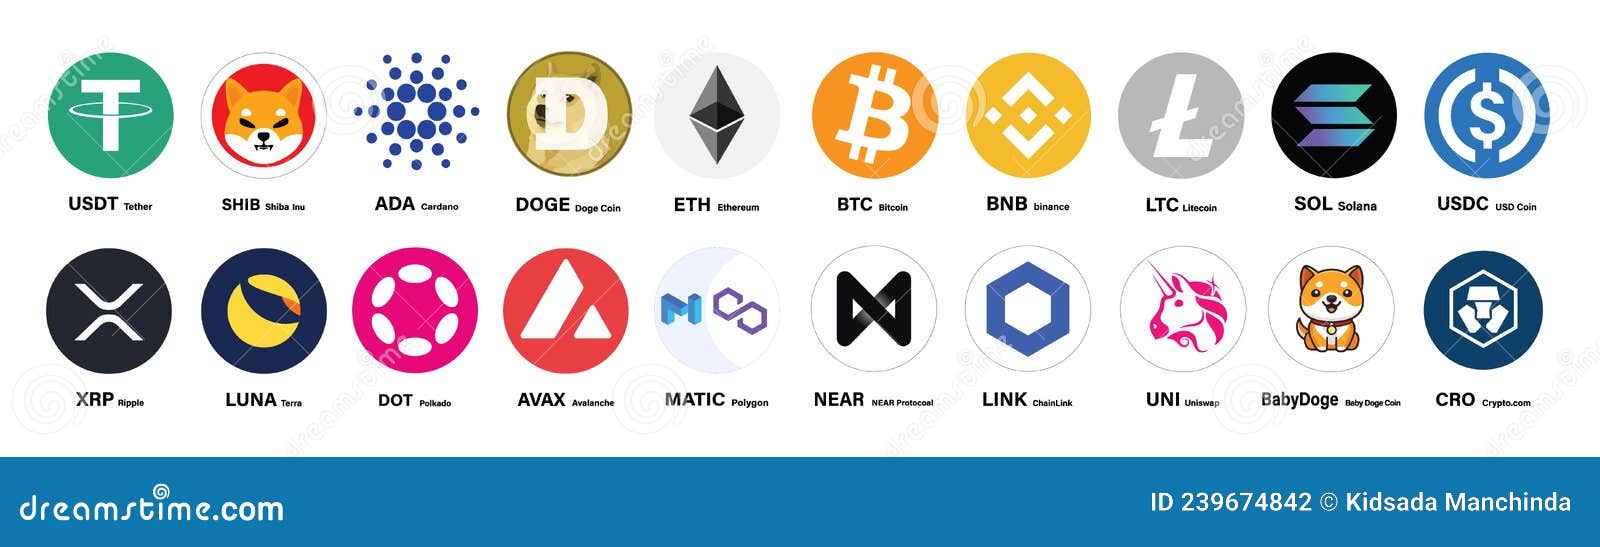 dia crypto currency